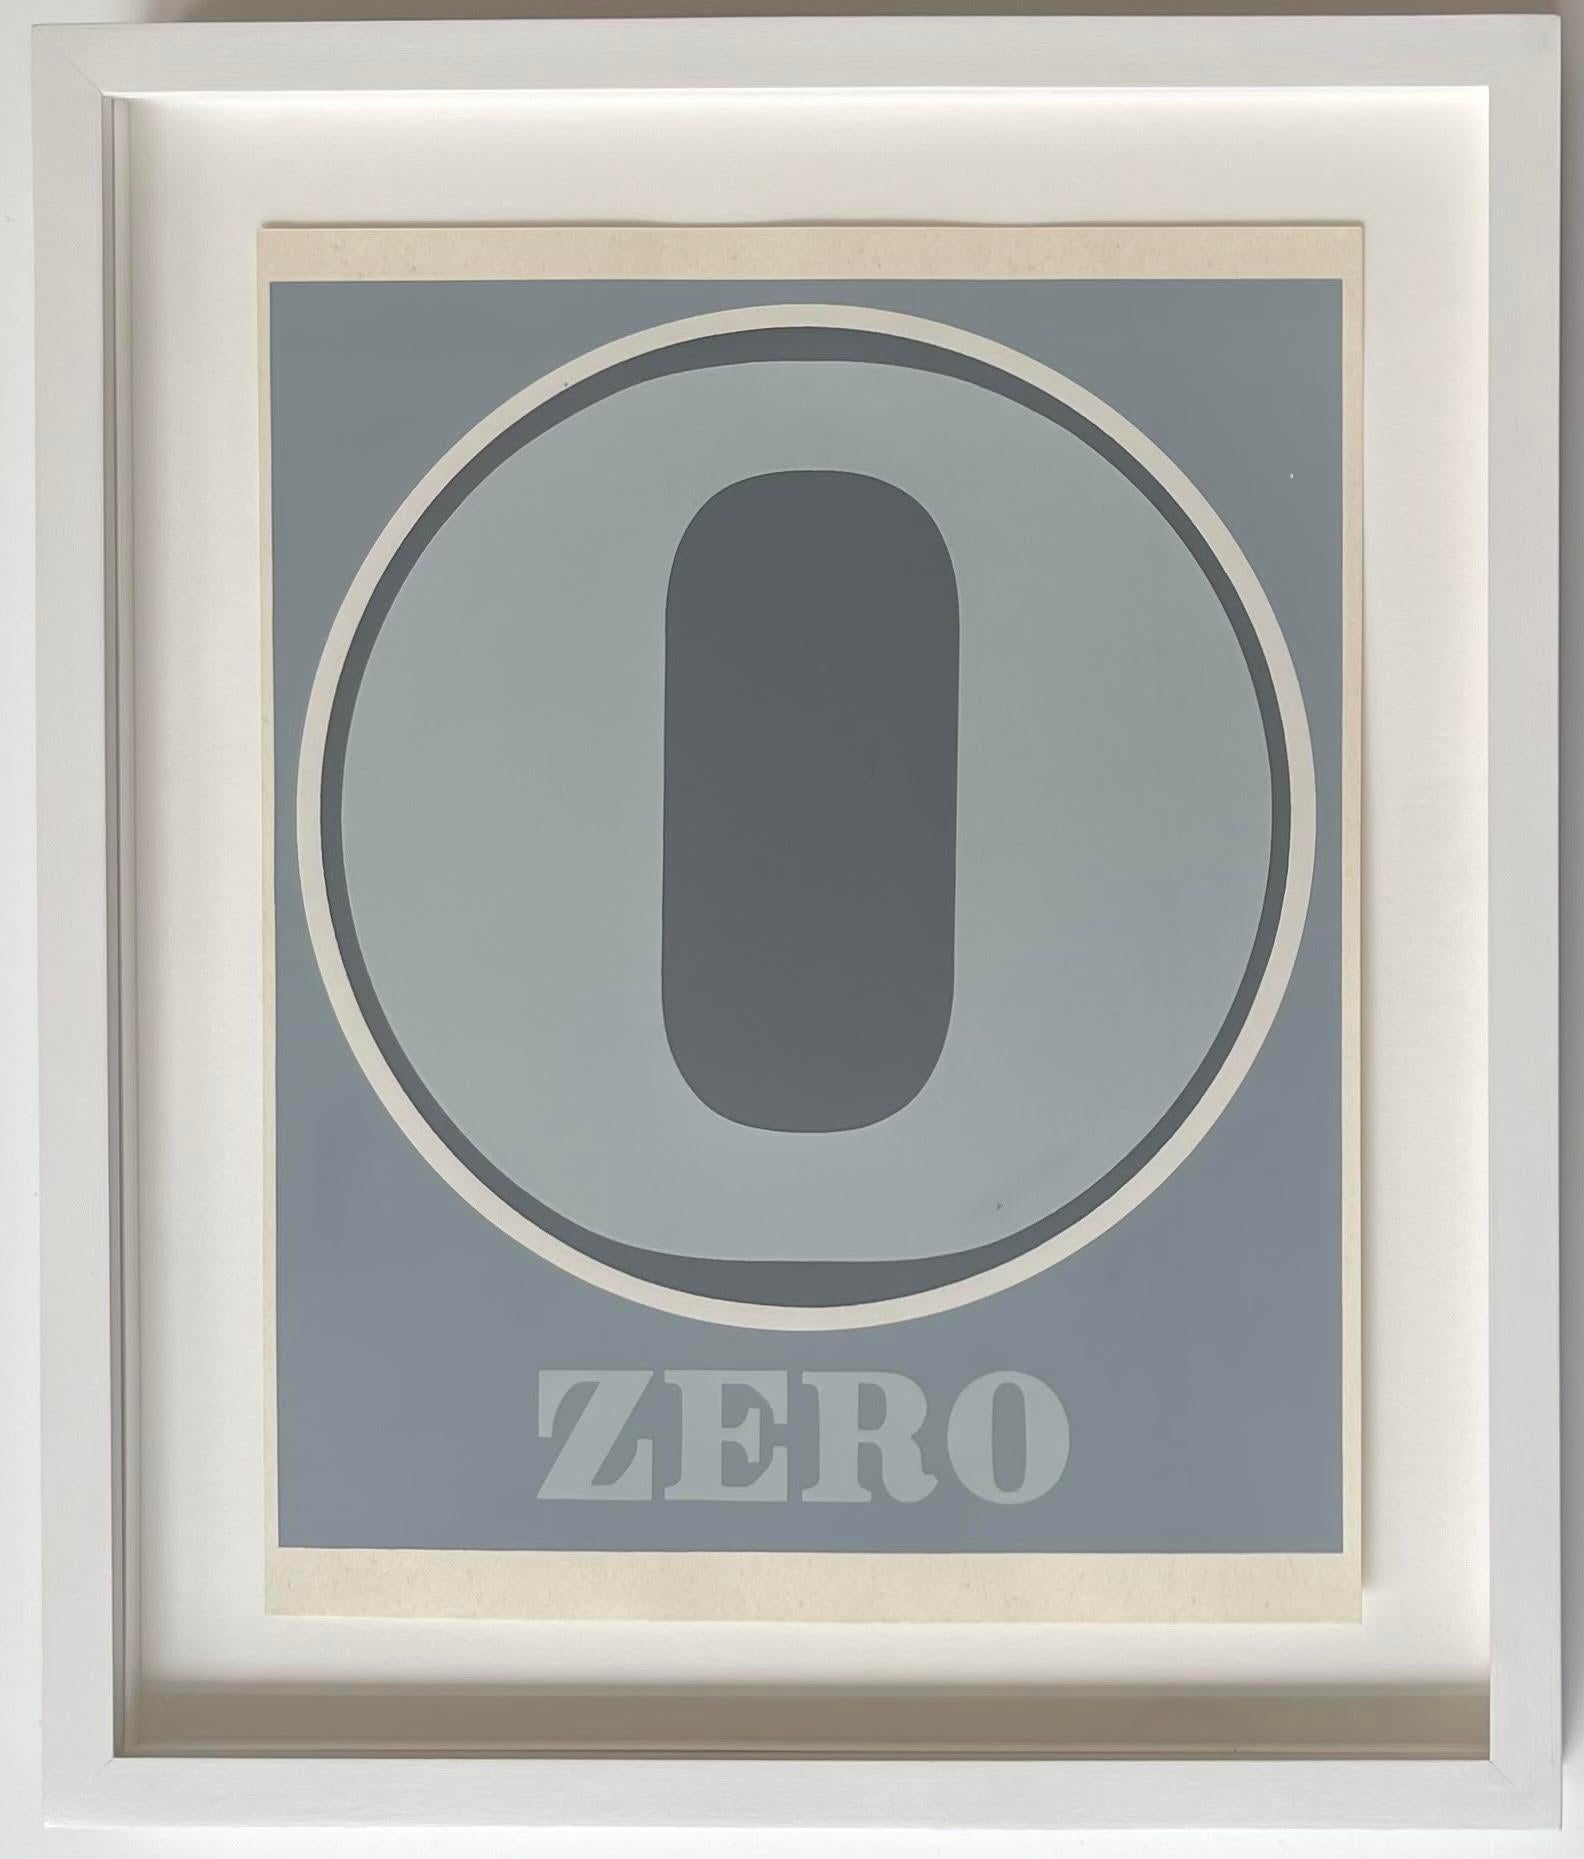 0 (Zero), from the original Numbers portfolio (Sheehan 46-55) Limited Ed. FRAMED - Pop Art Print by Robert Indiana